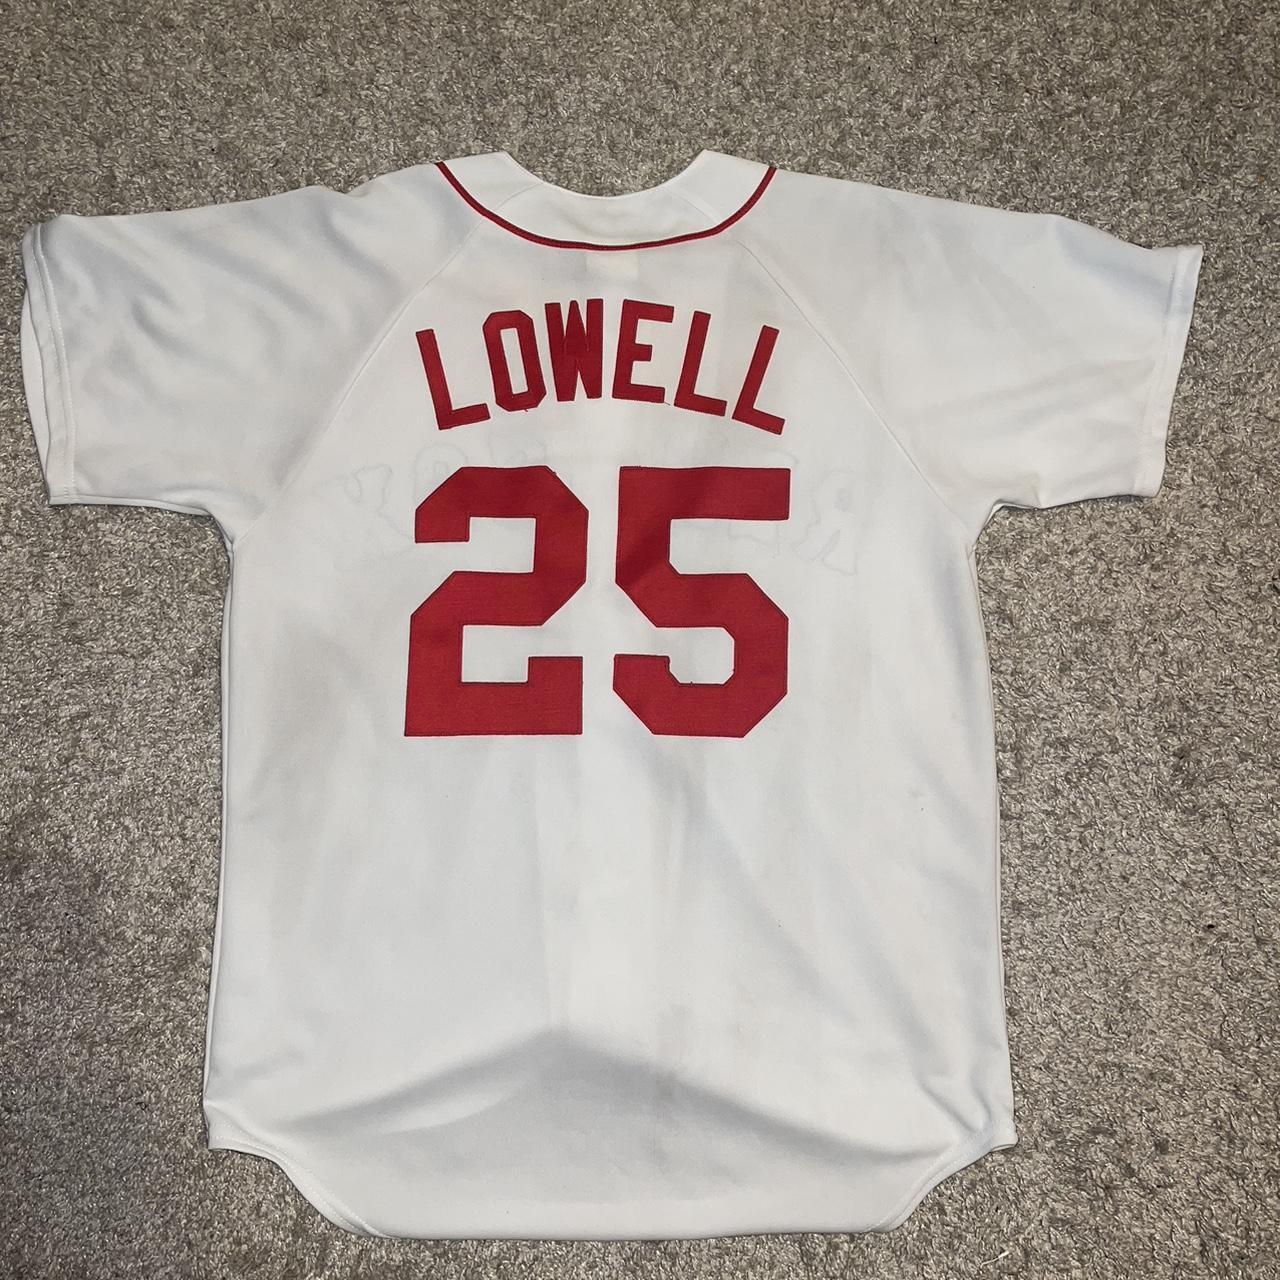 Vintage 2000s Red Sox Mike Lowell Jersey Small - Depop